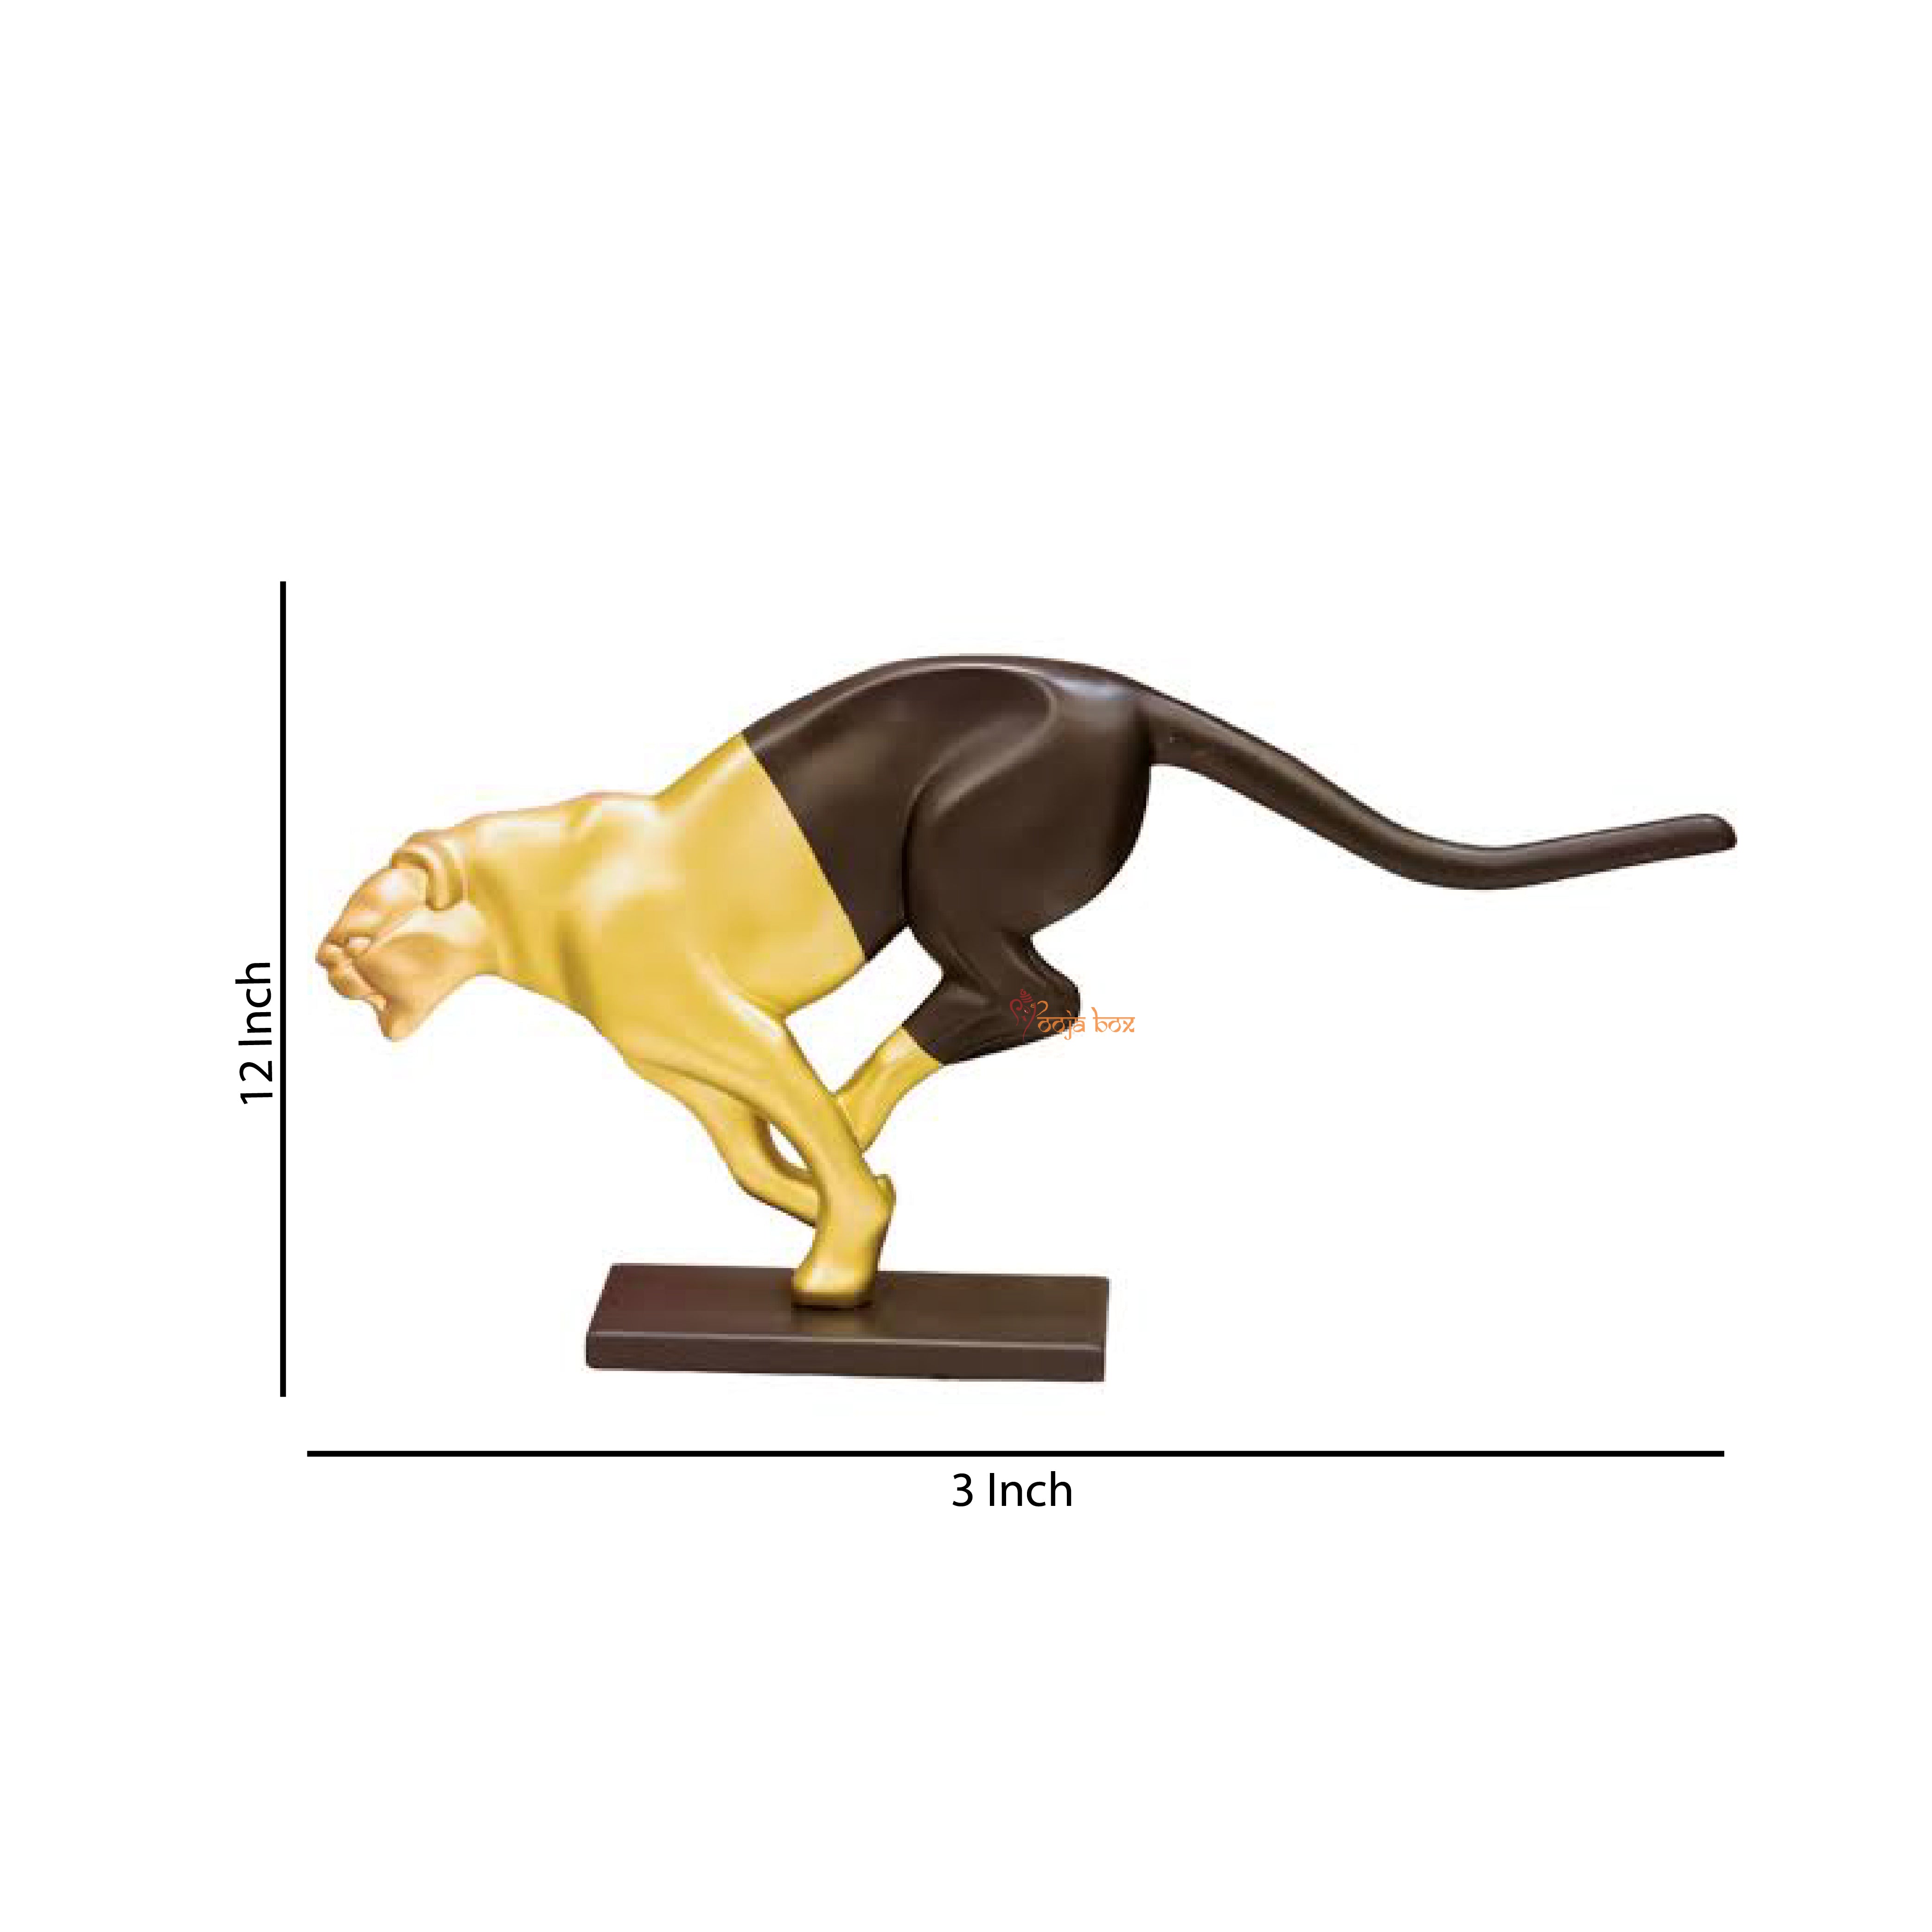 ABSTRACT GRACEFUL PANTHER SCULPTURE